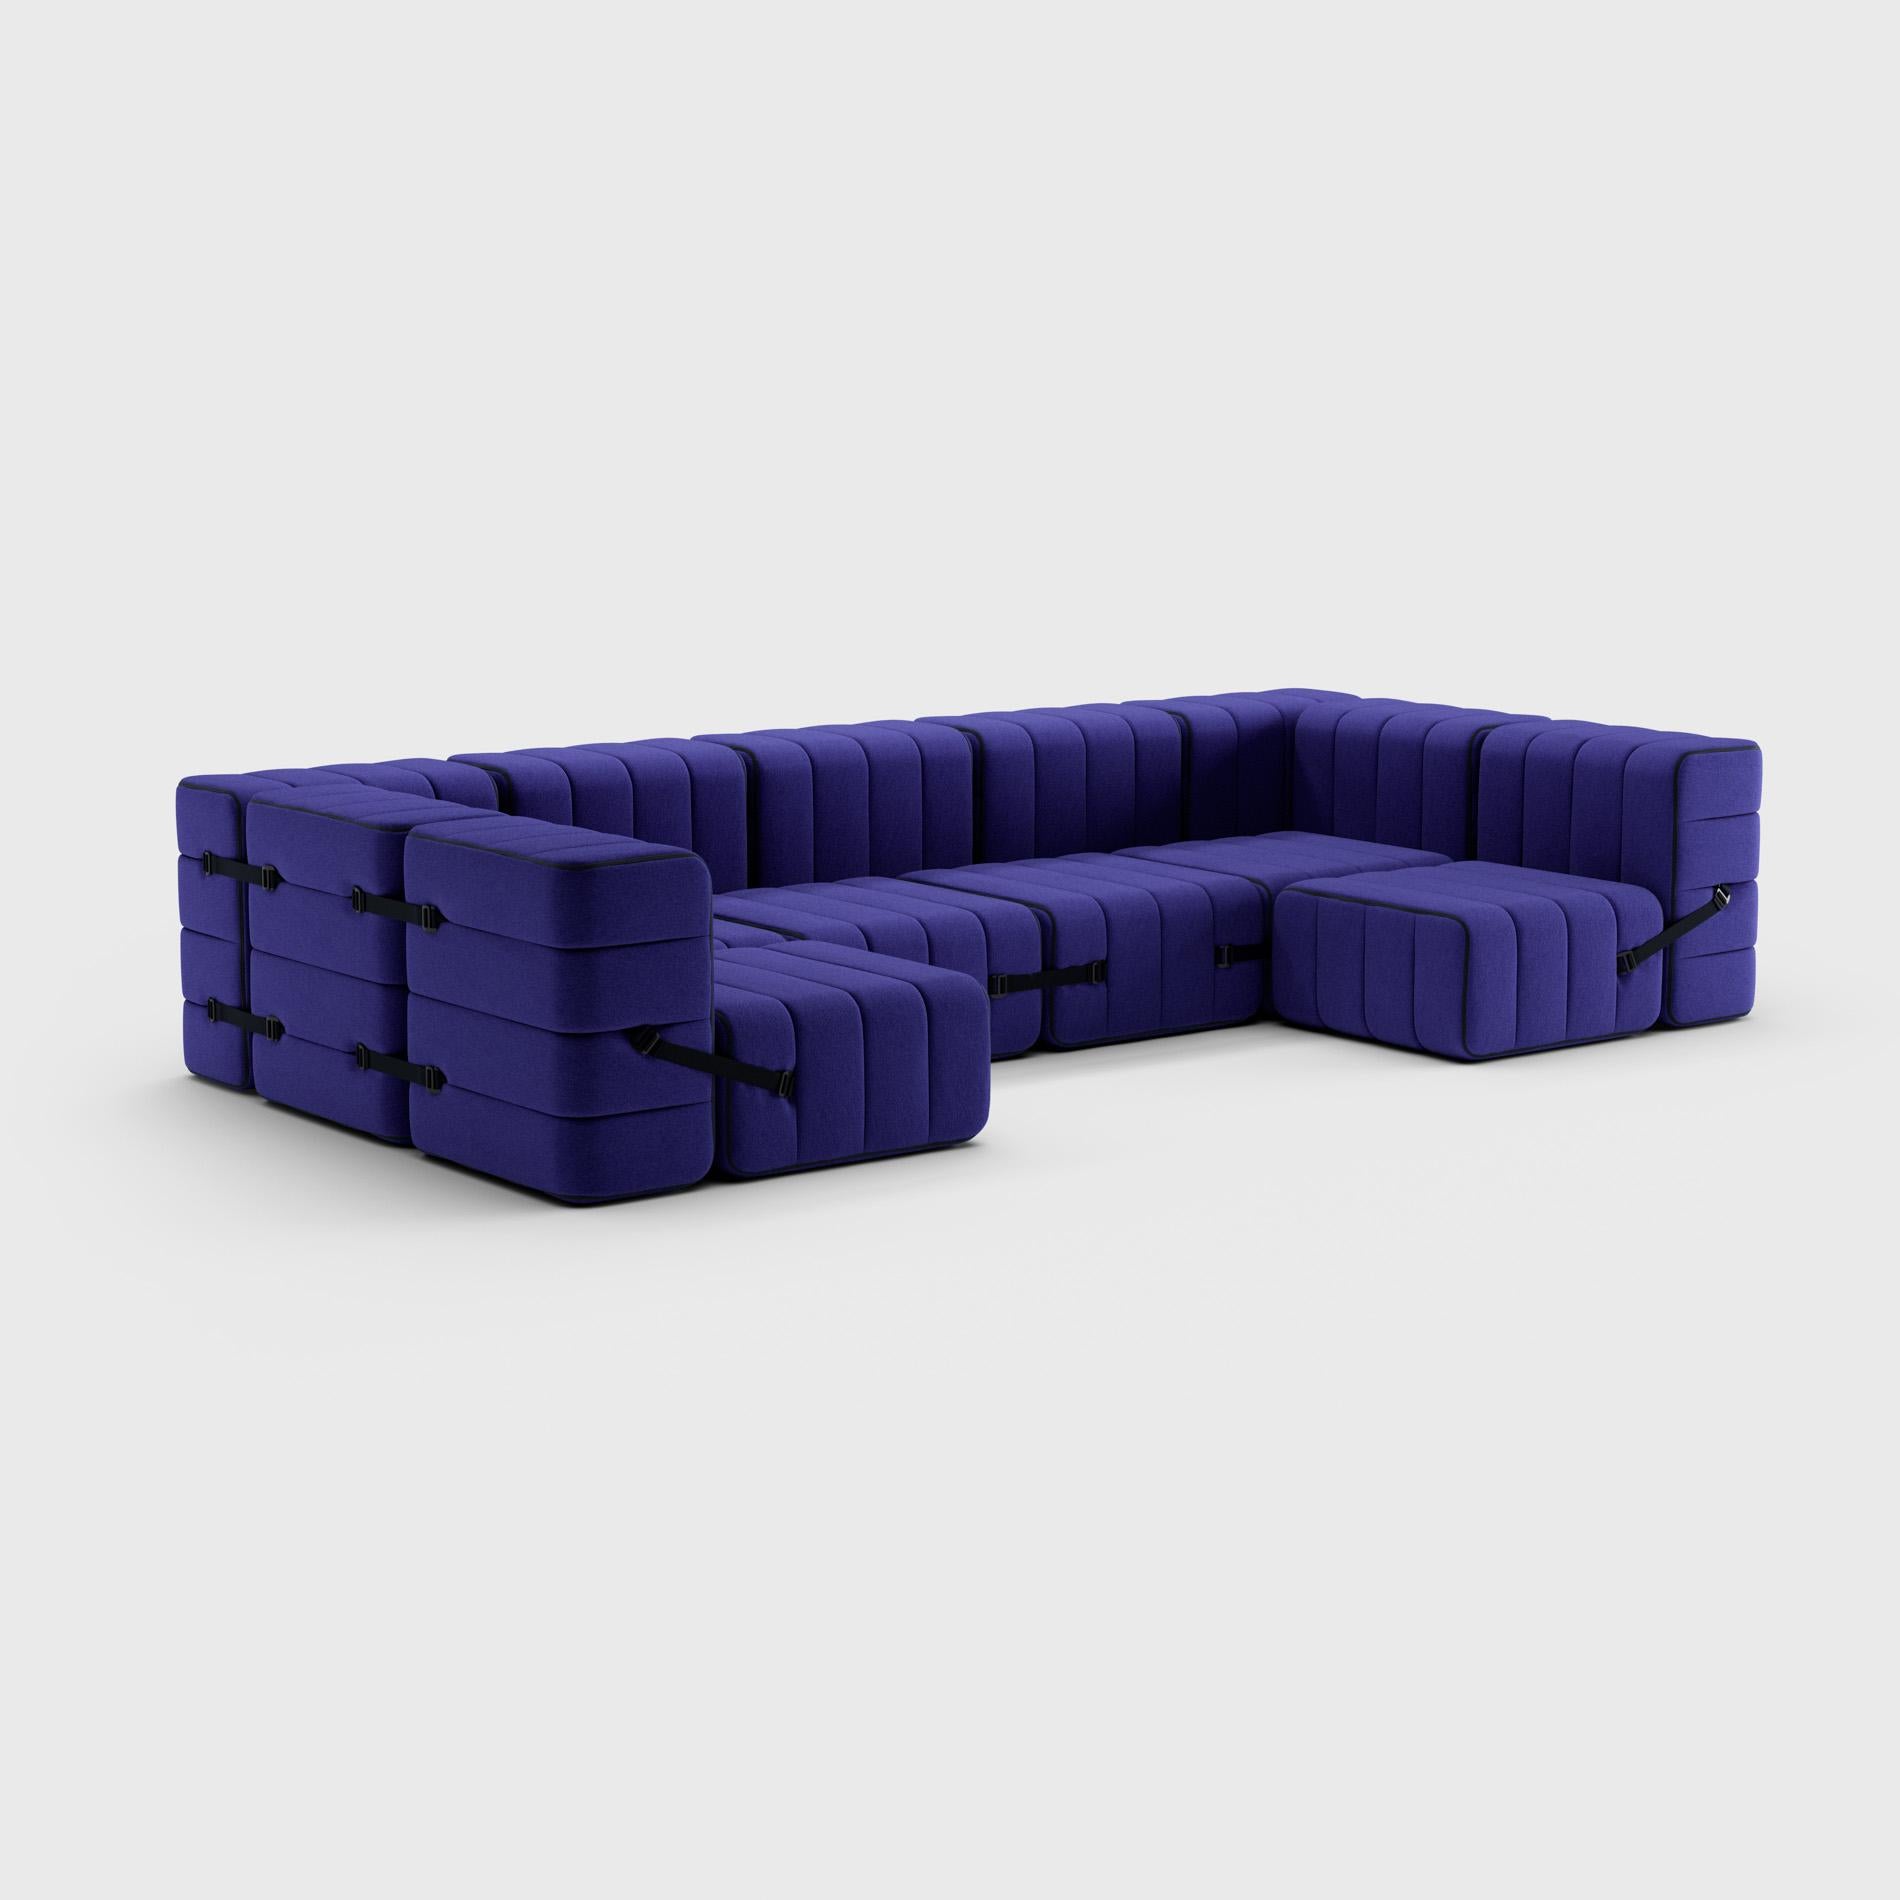 Curt Single Module – Fabric Jet '9605 Blue' – Curt Modular Sofa System In New Condition For Sale In Berlin, BE